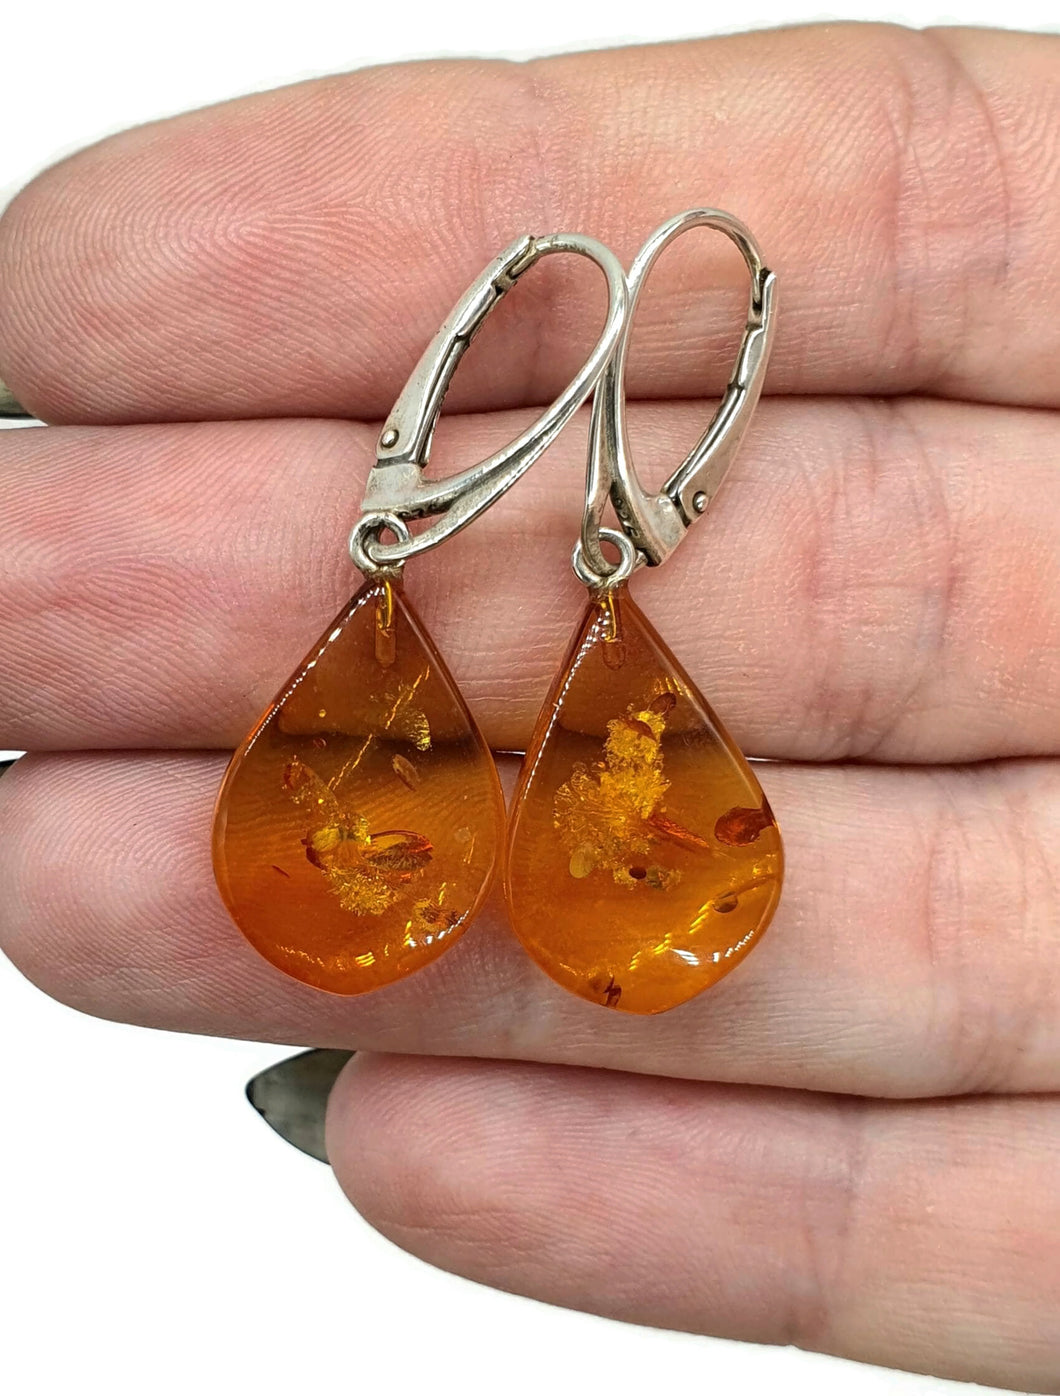 Baltic Amber Earrings, Pear Shaped, 50 million years old, Sterling Silver, Fossilized - GemzAustralia 